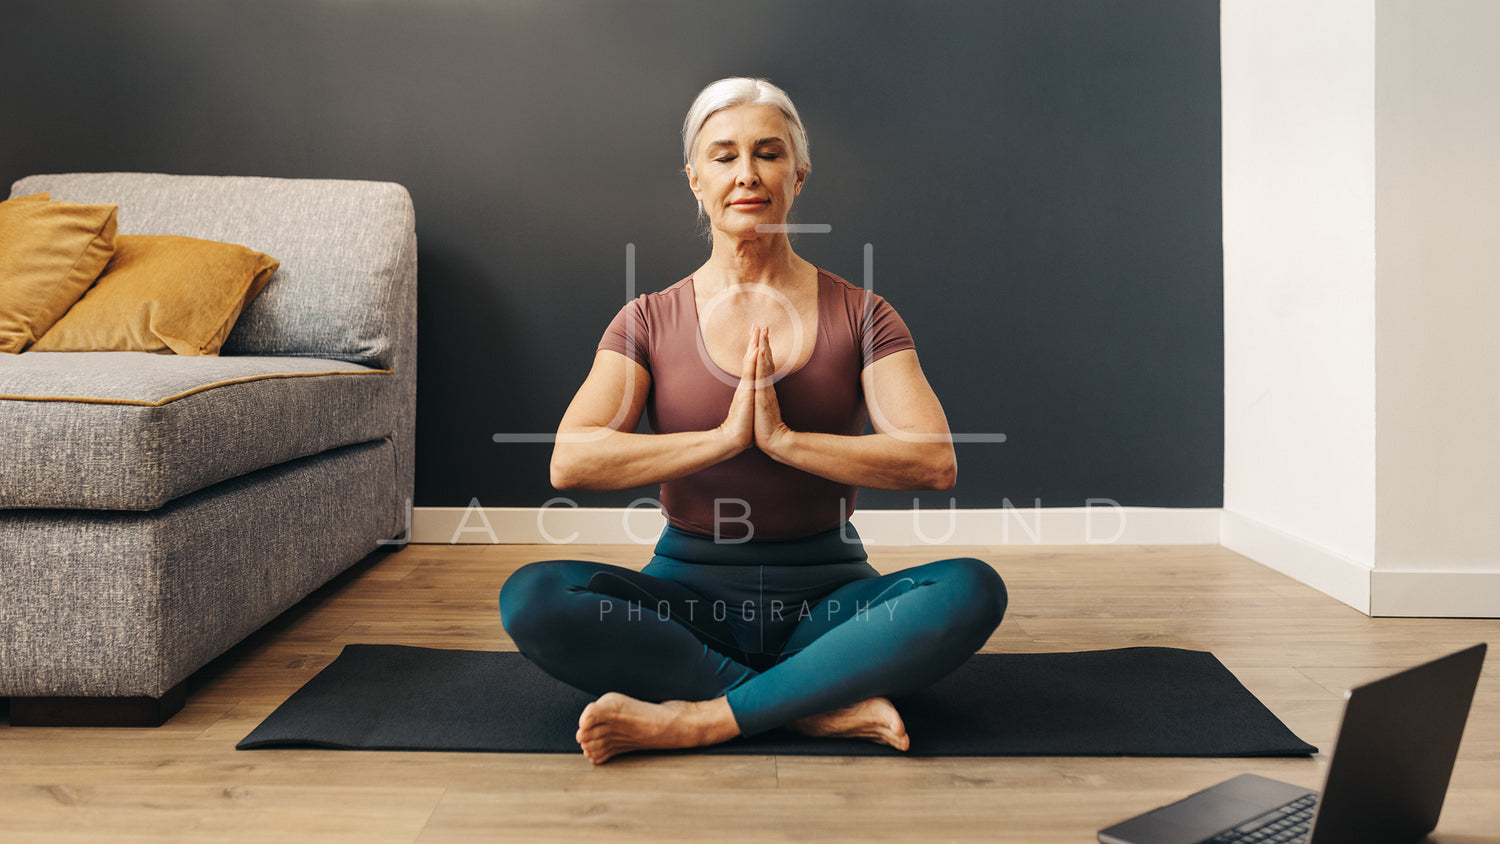 Free Photos - A Woman Performing Yoga, Kneeling Down With Her Hands Clasped  Together In Prayer Position. She Appears To Be Focused And Engaged In Her  Exercise Routine. | FreePixel.com